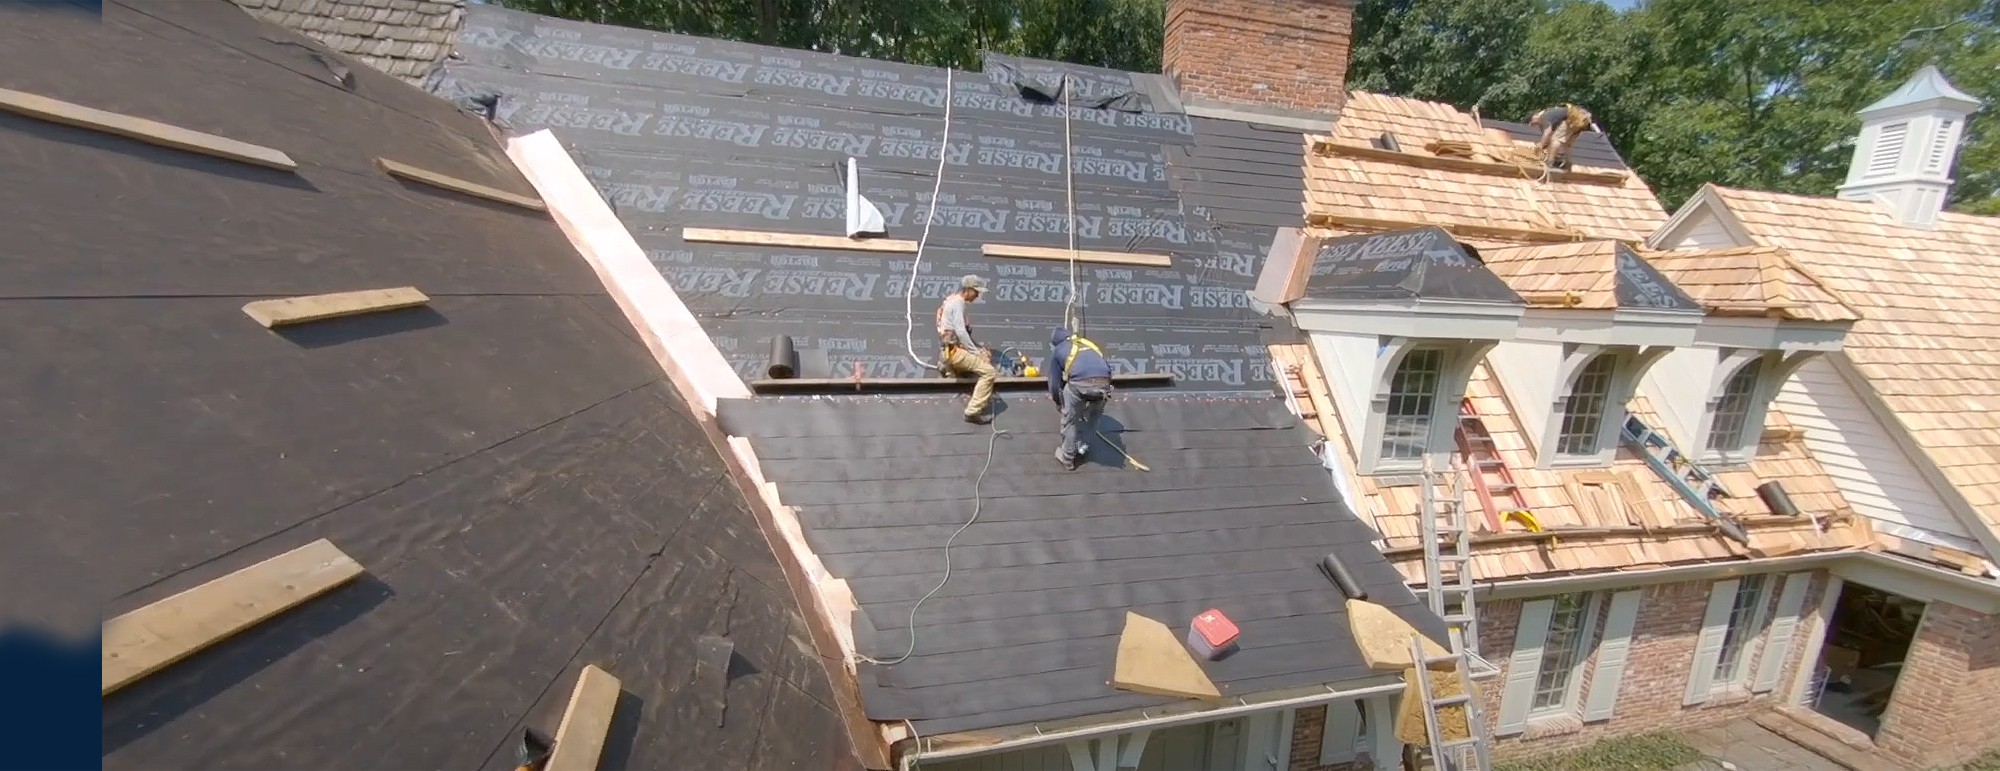 Roofing Contractors Replacing Shingles in Indianapolis, IN